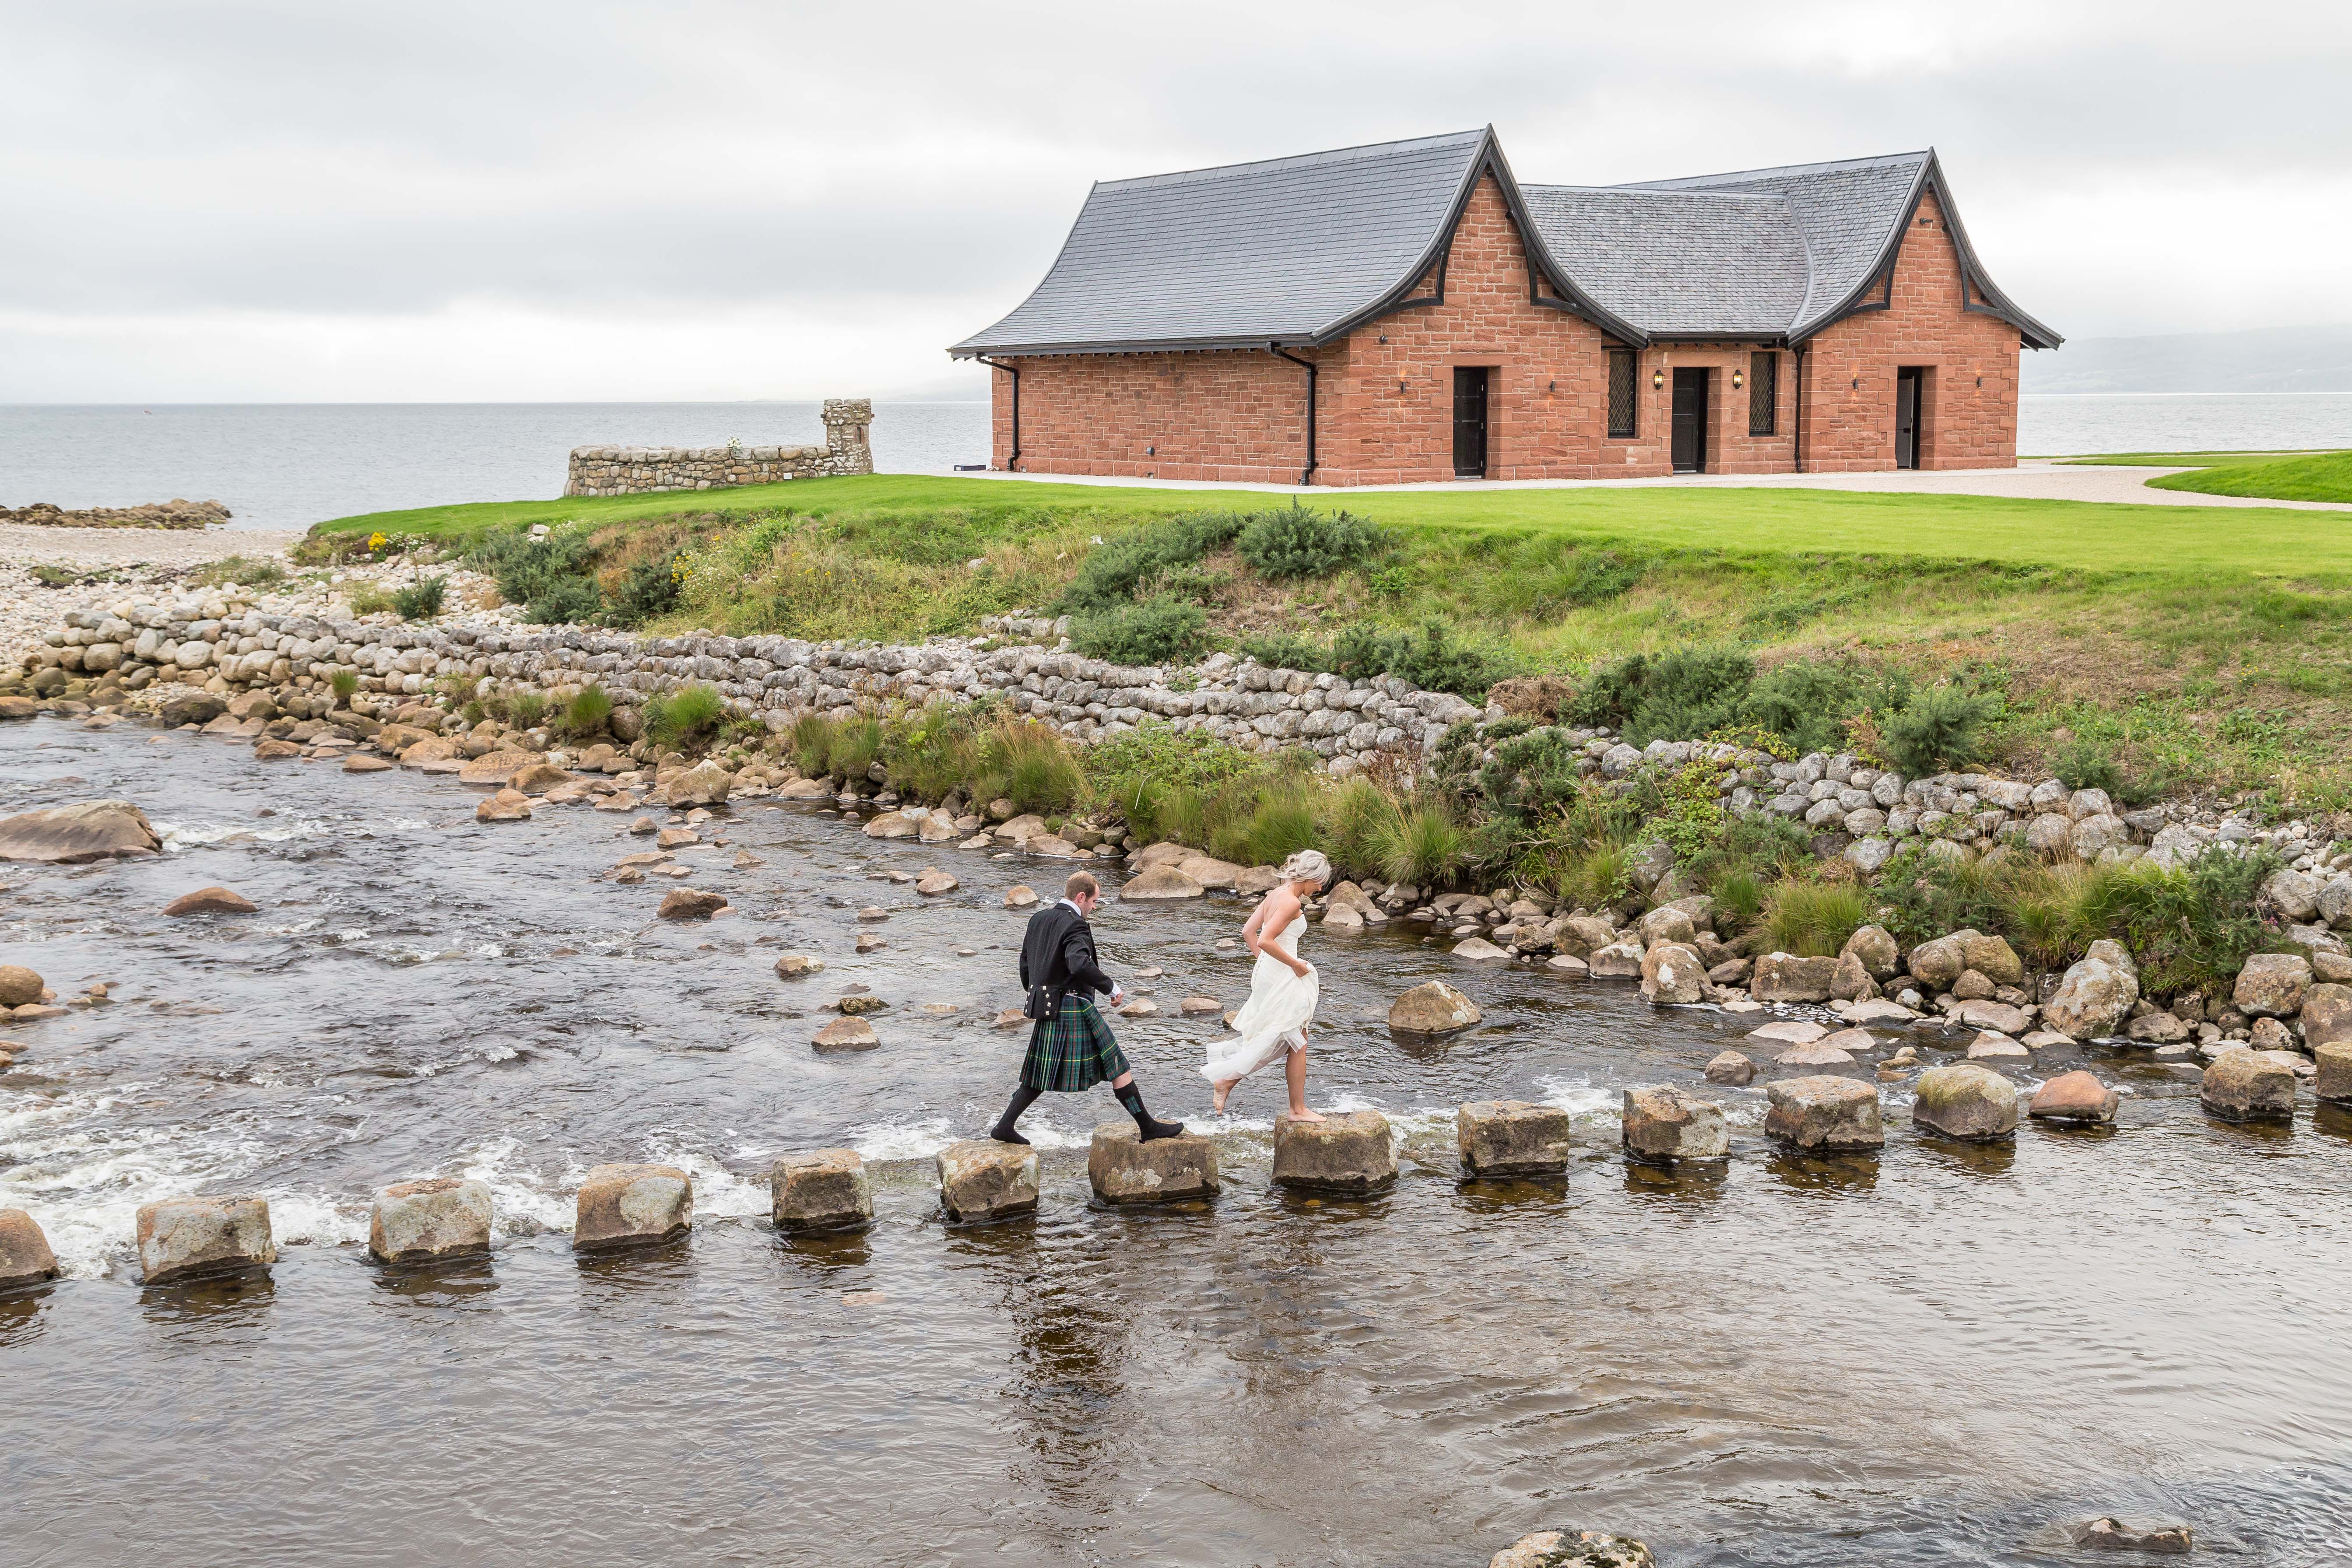 Dougarie Boat House, wedding venue on the Isle of Arran in the Scottish Isles